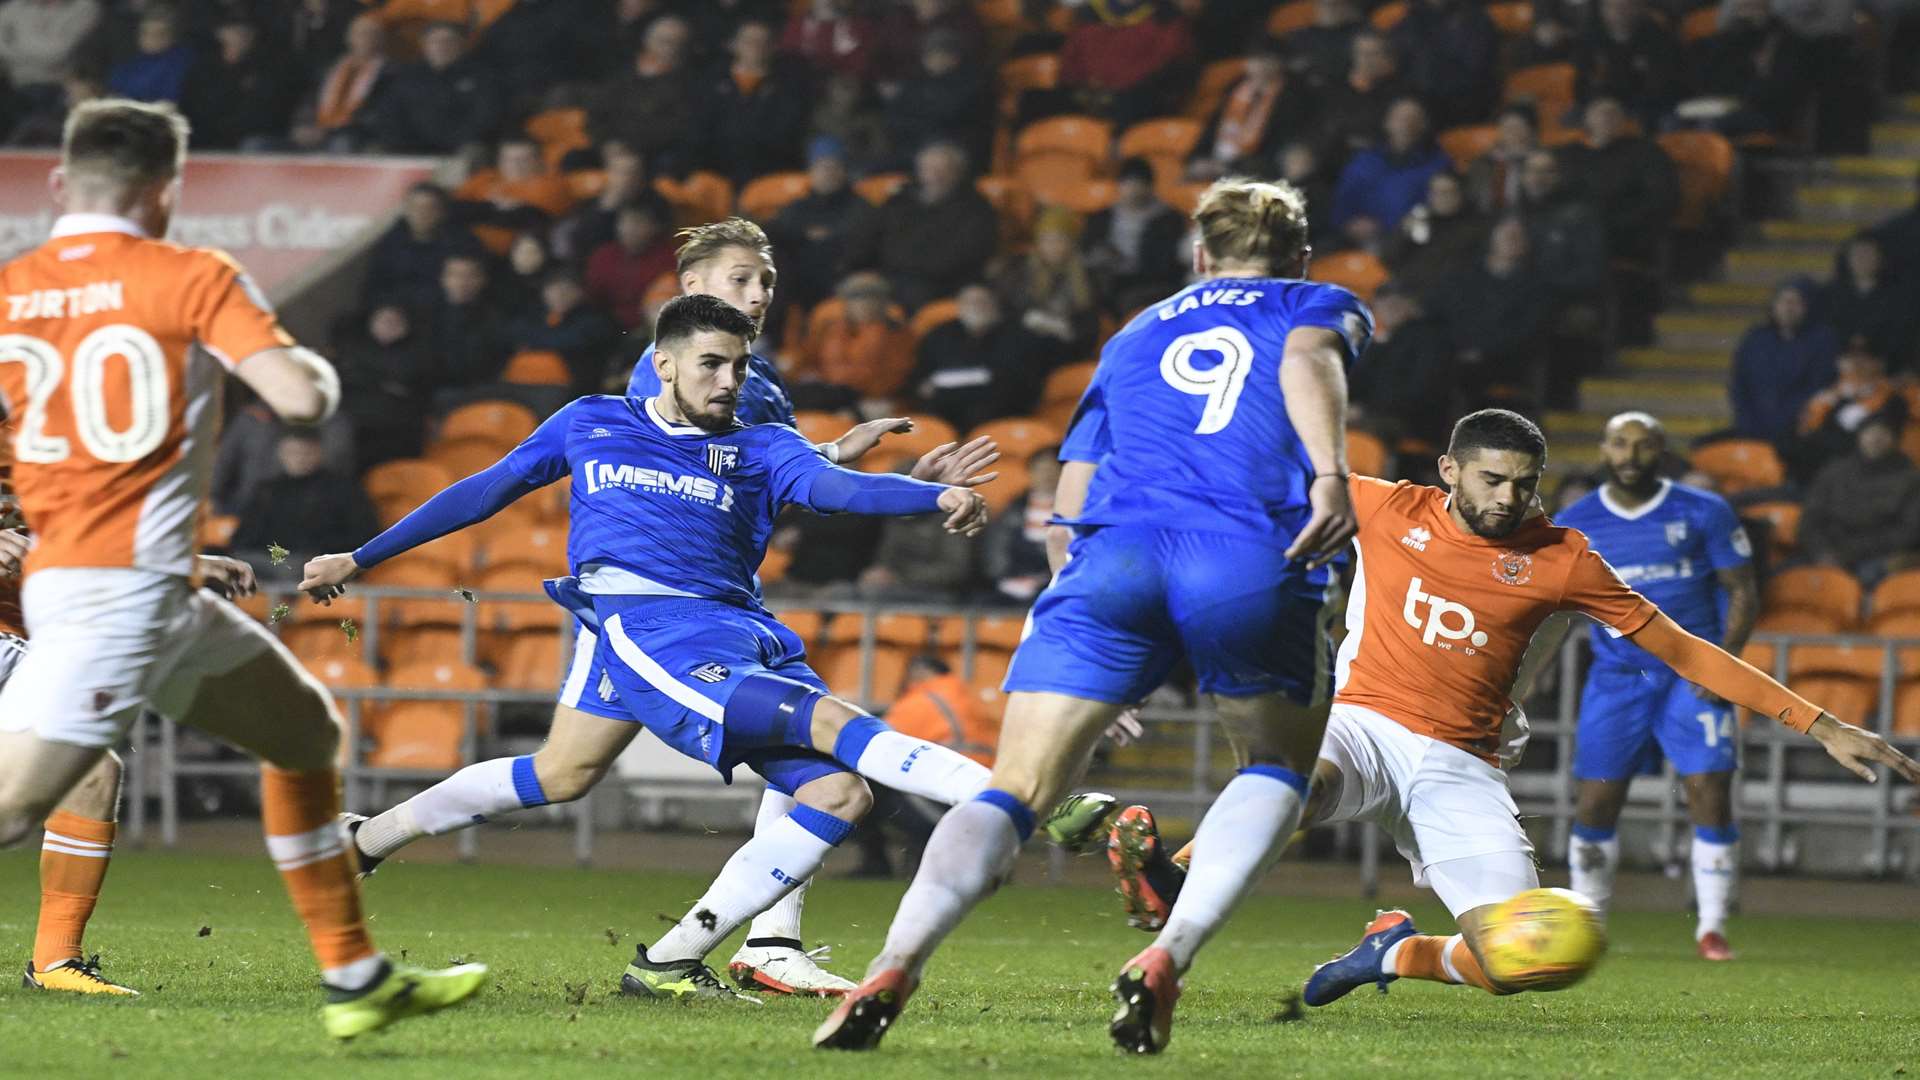 Conor Wilkinson fires a shot at goal Picture: Barry Goodwin